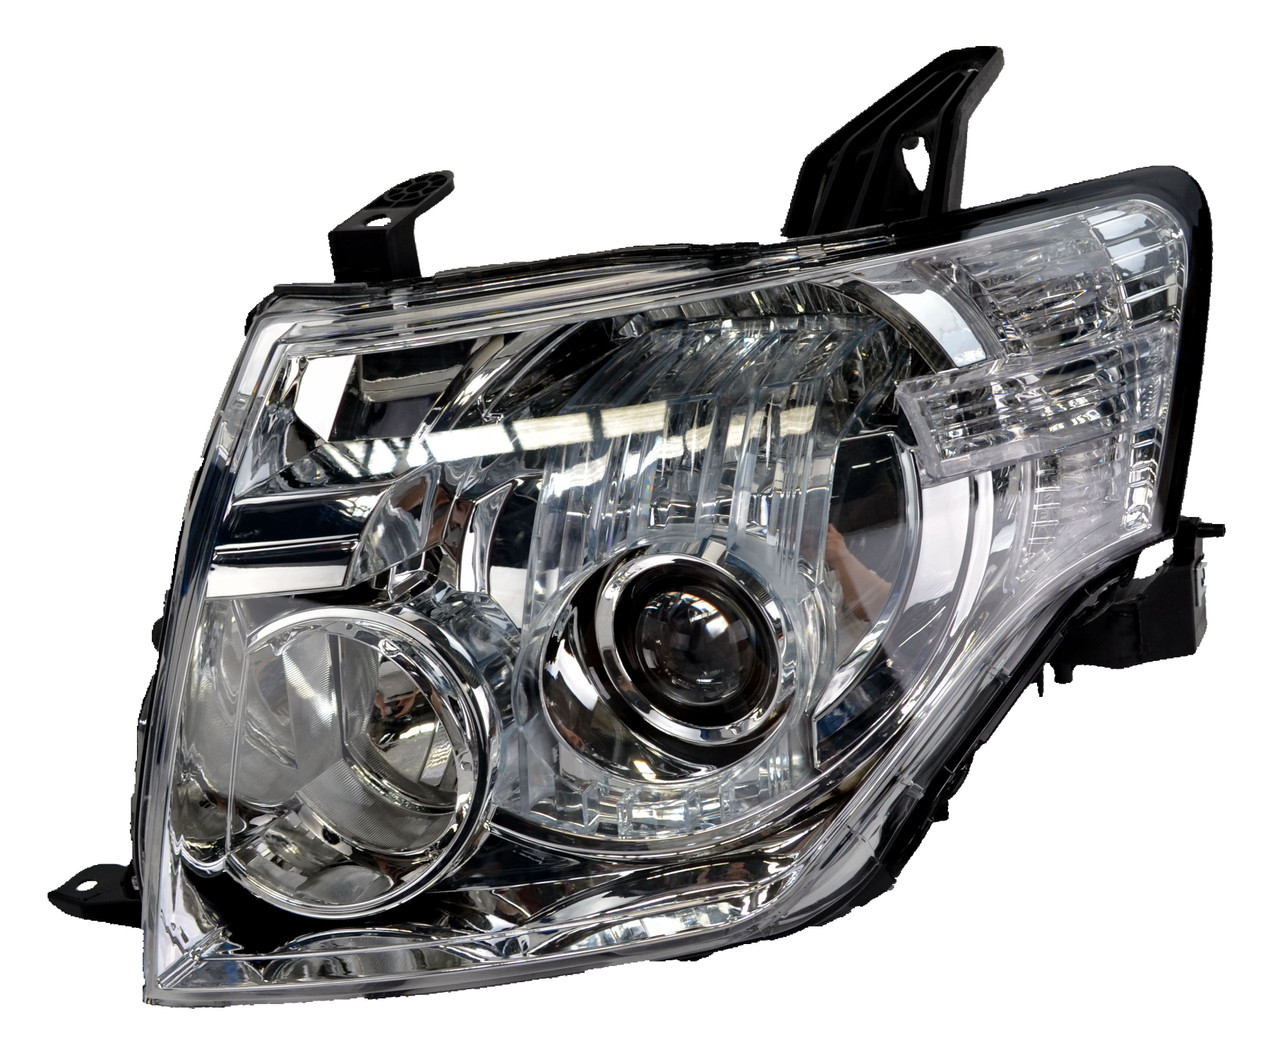 Headlight for Mitsubishi Pajero NS/NT/NW 11/06-06/14 New Left Front Lamp 07 08 09 10